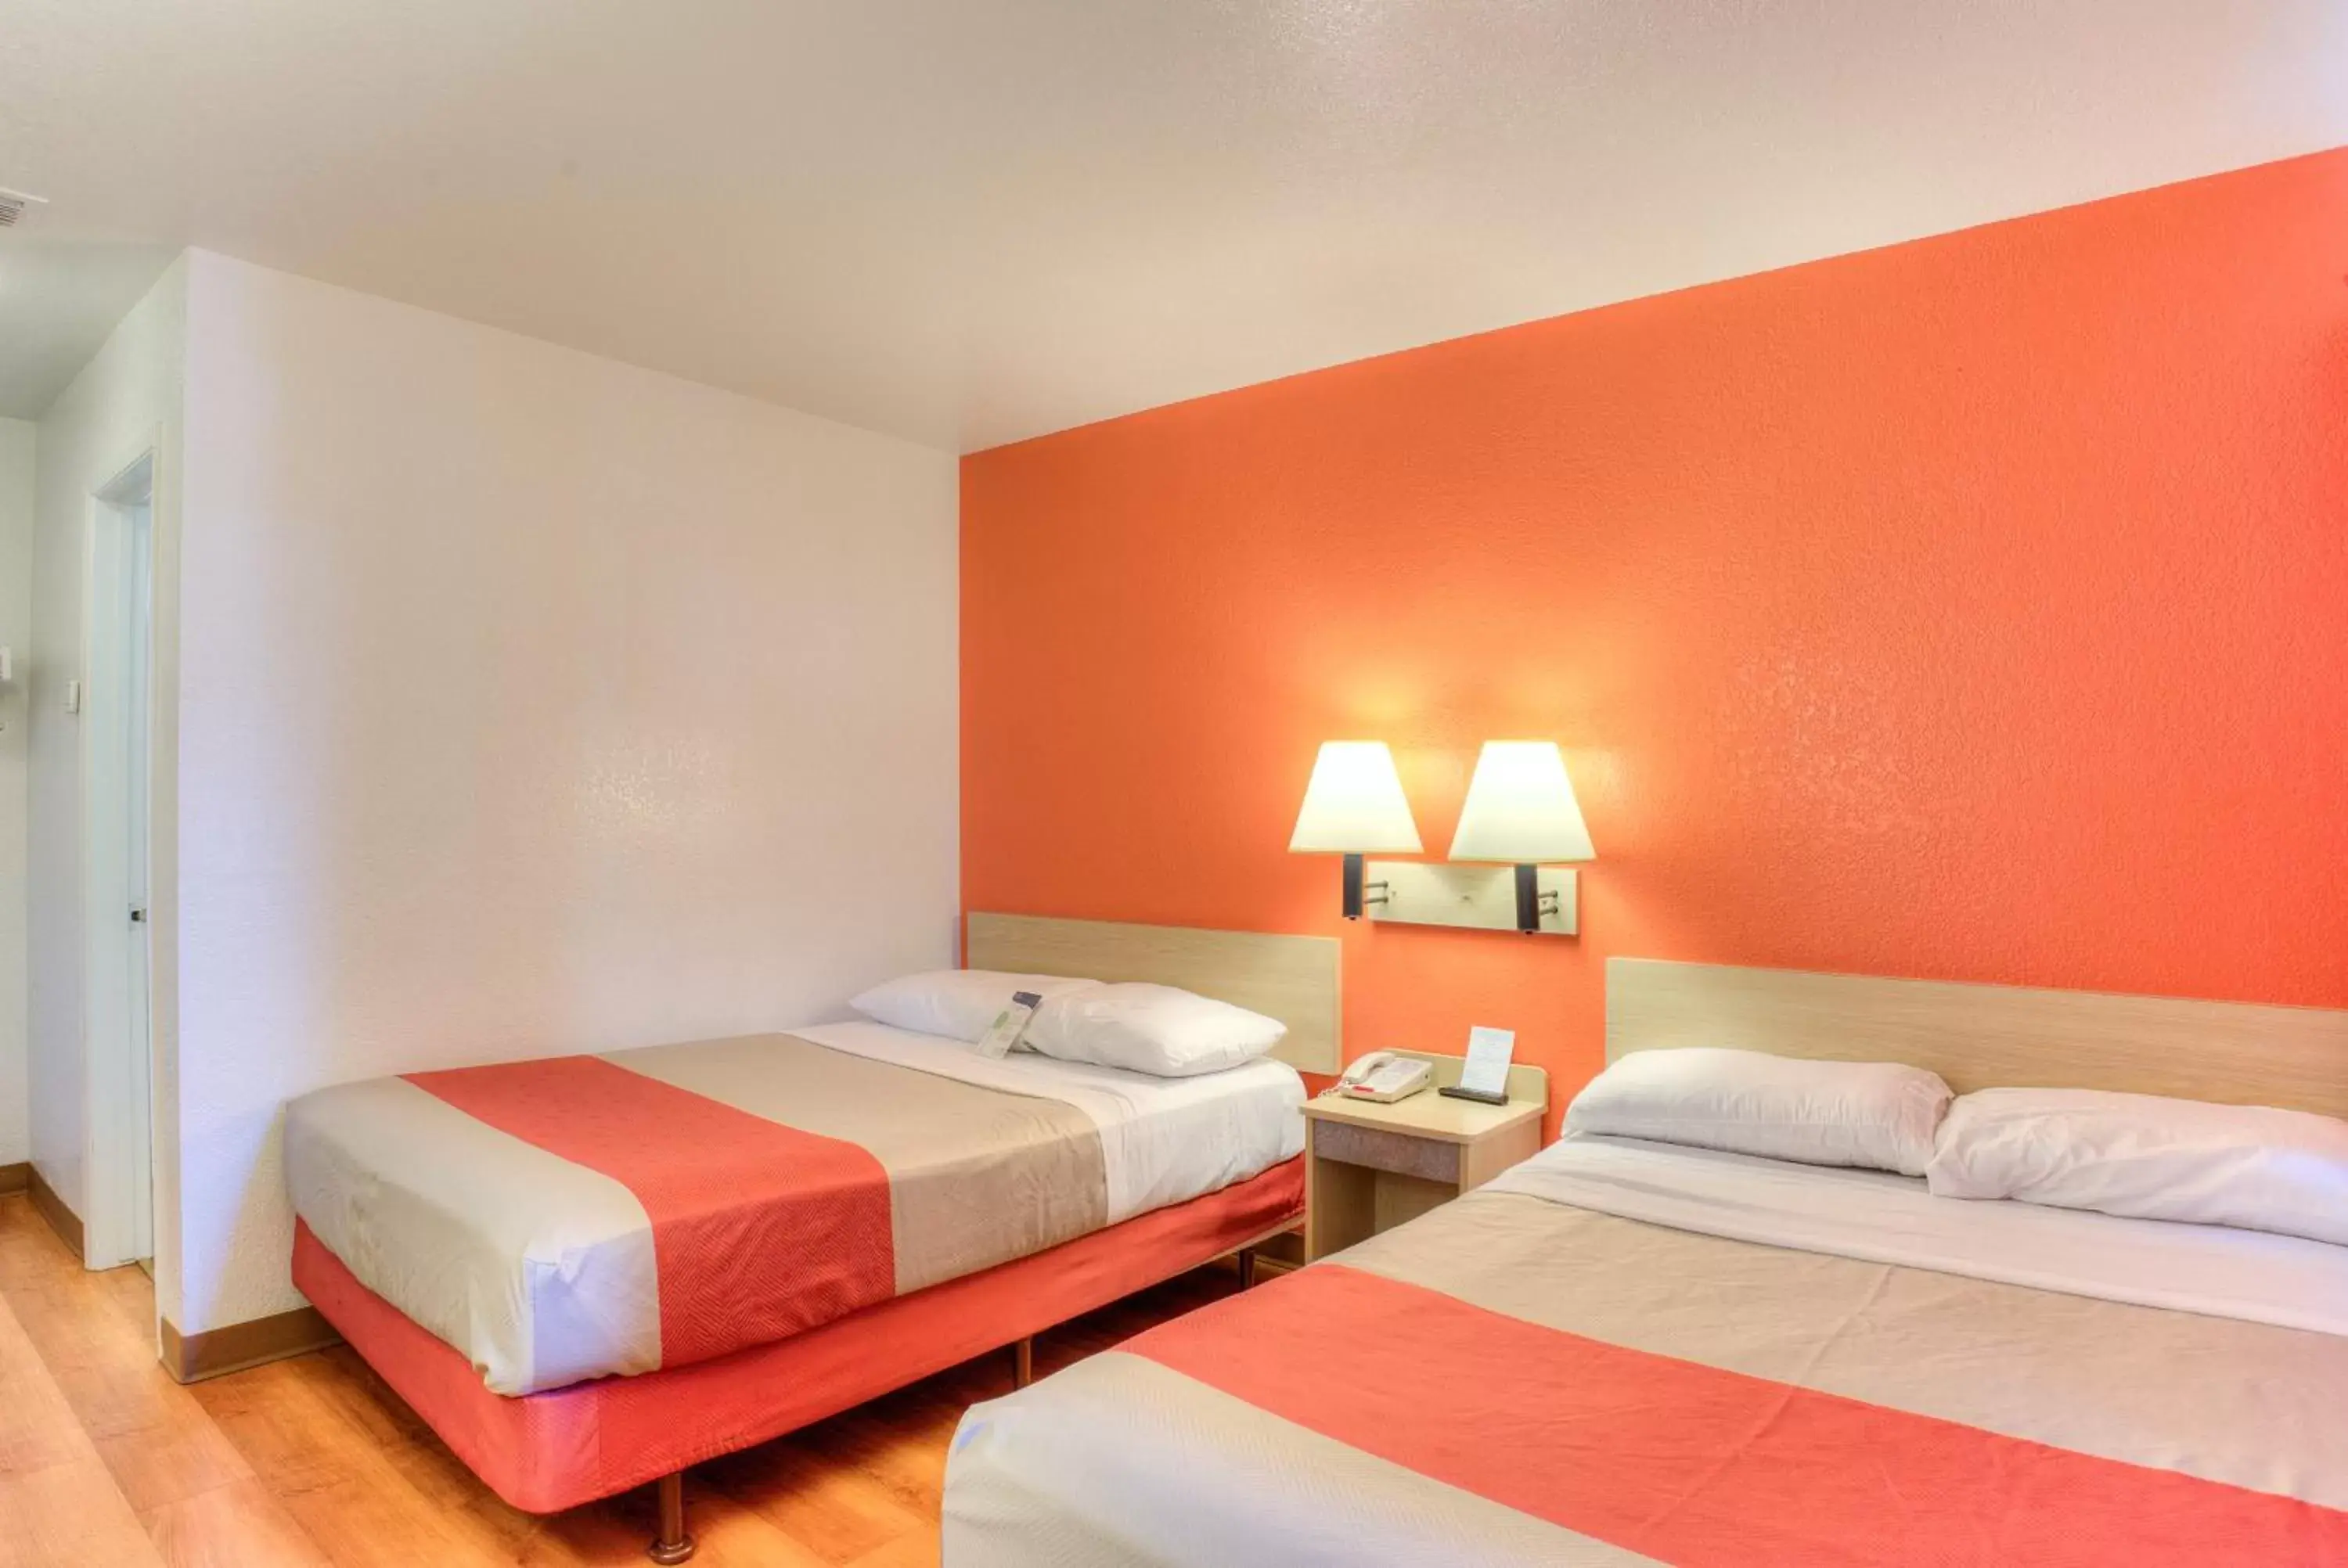 Bed, Room Photo in Motel 6-Tigard, OR - Portland South - Lake Oswego